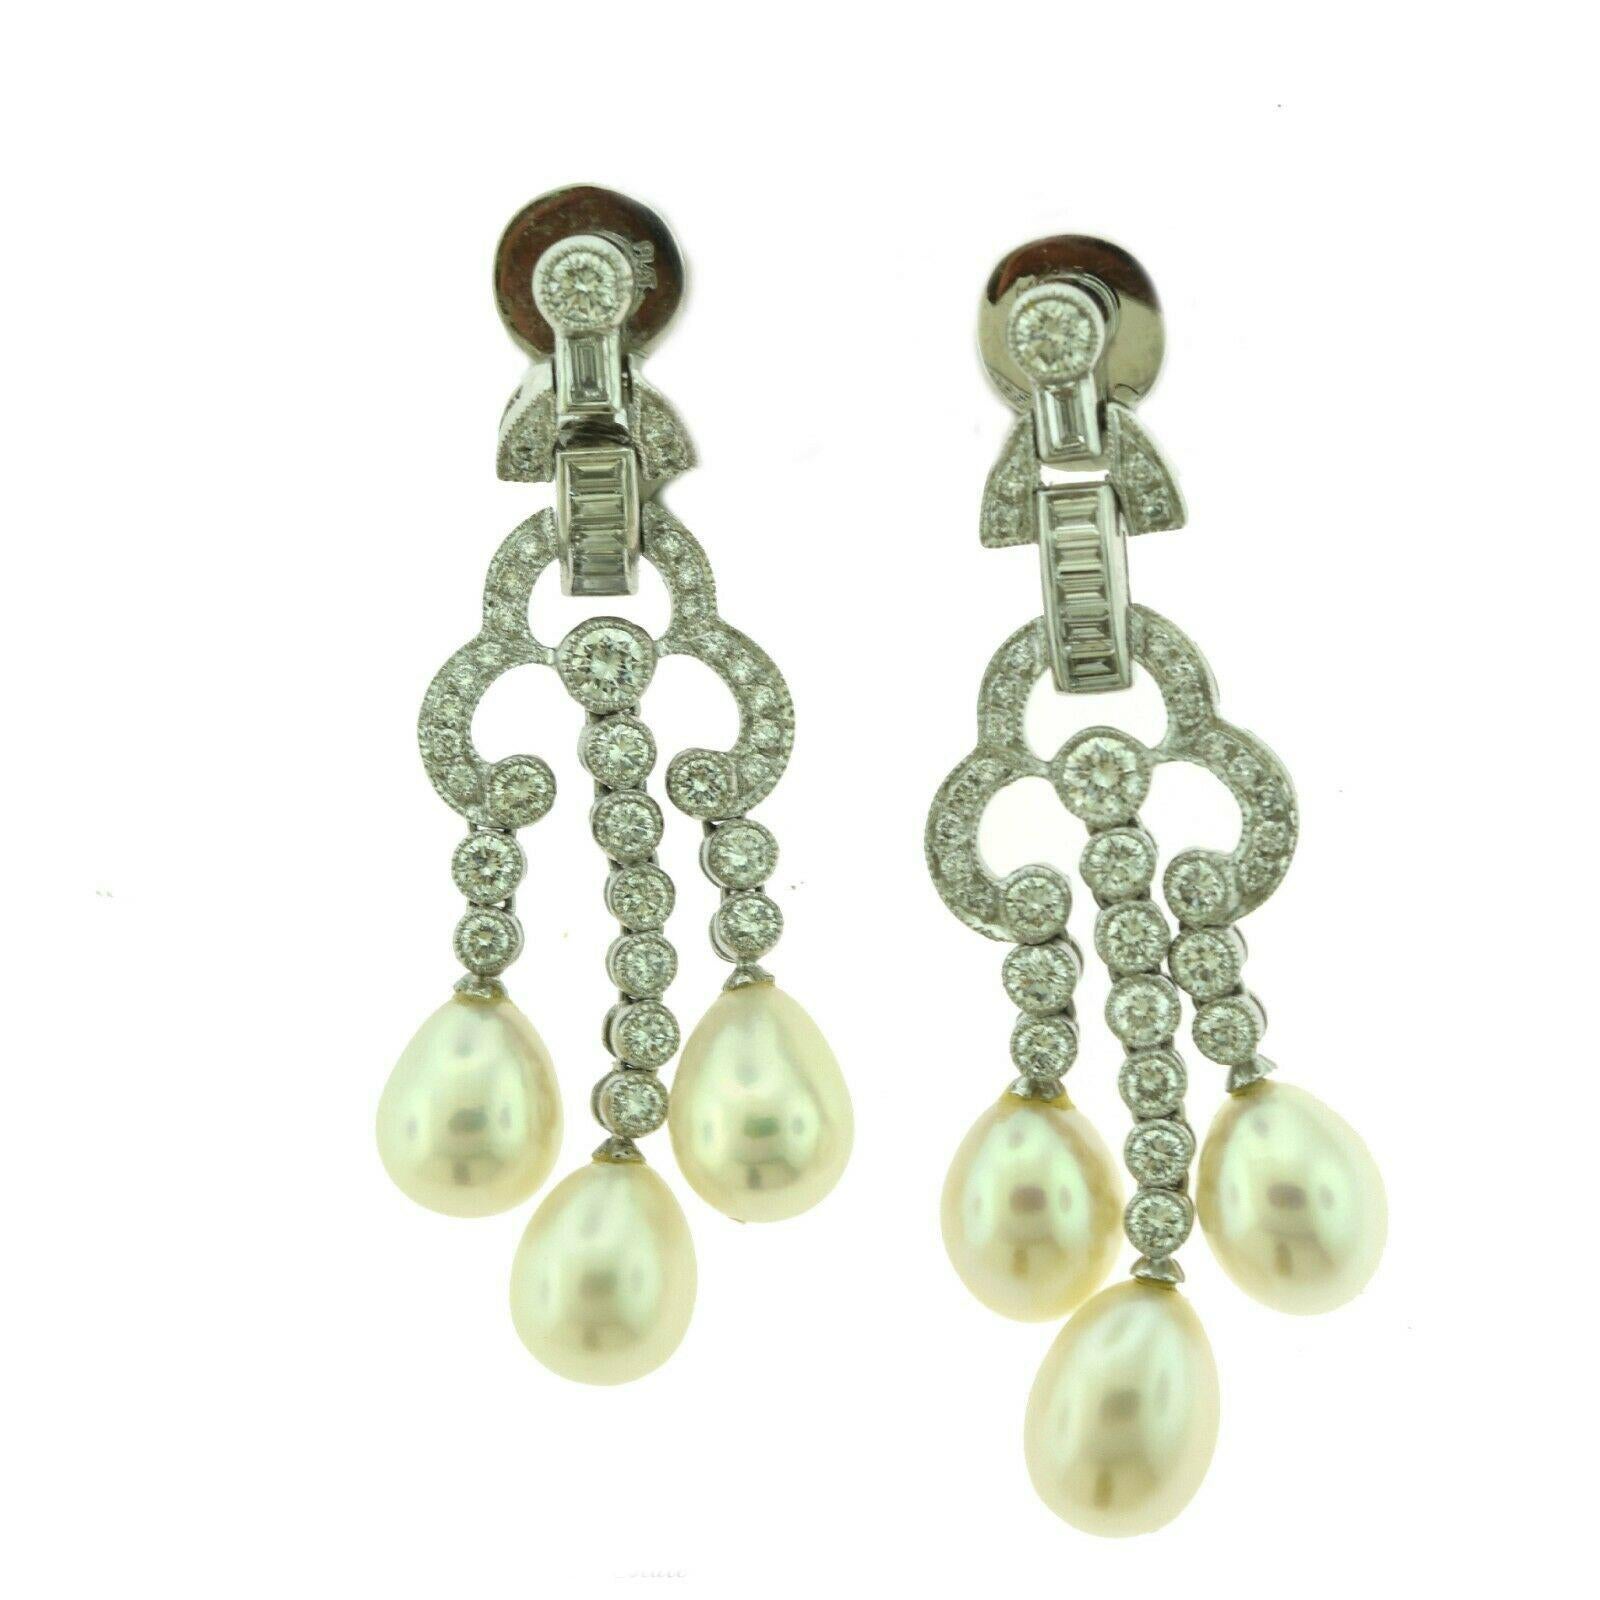 Round Cut Estate Victorian Diamond Drop Dangle Earrings in Platinum with Pearls